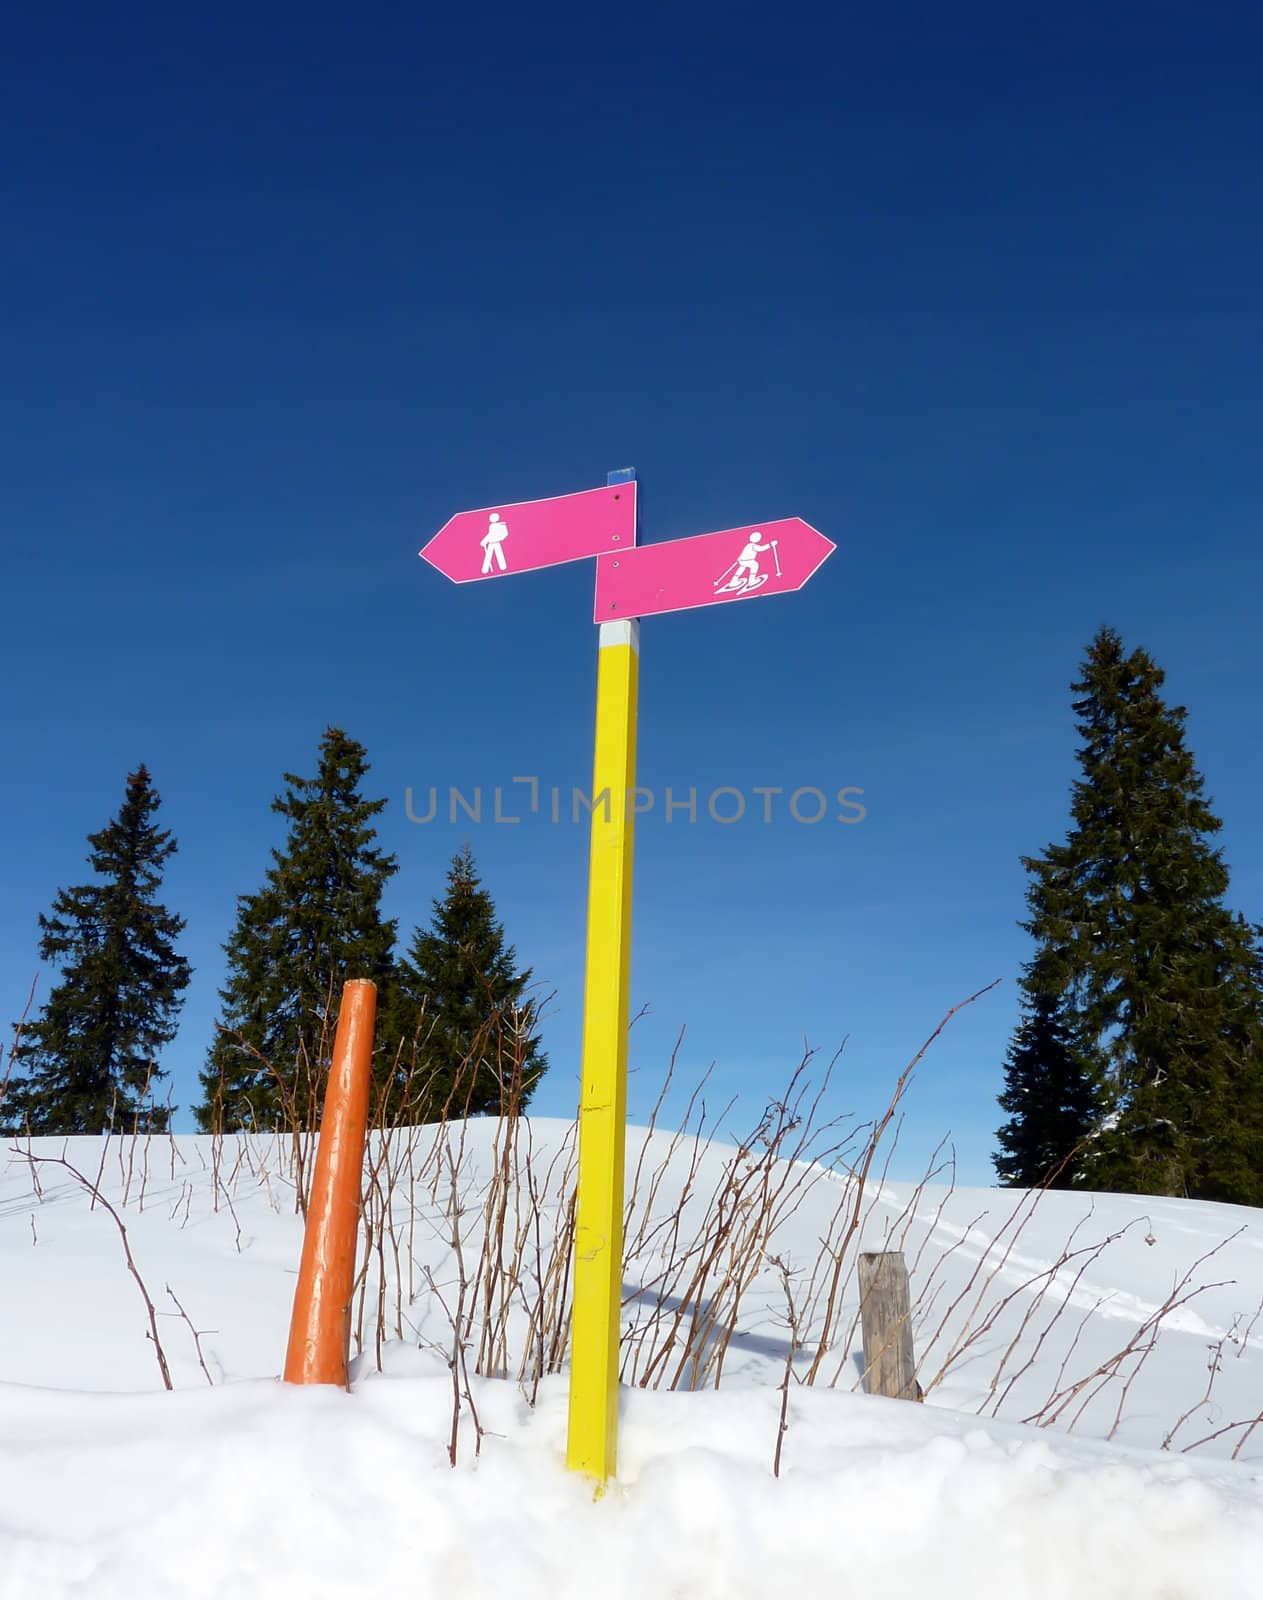 Sign for hikers and persons with snowshoes upon snow by winter